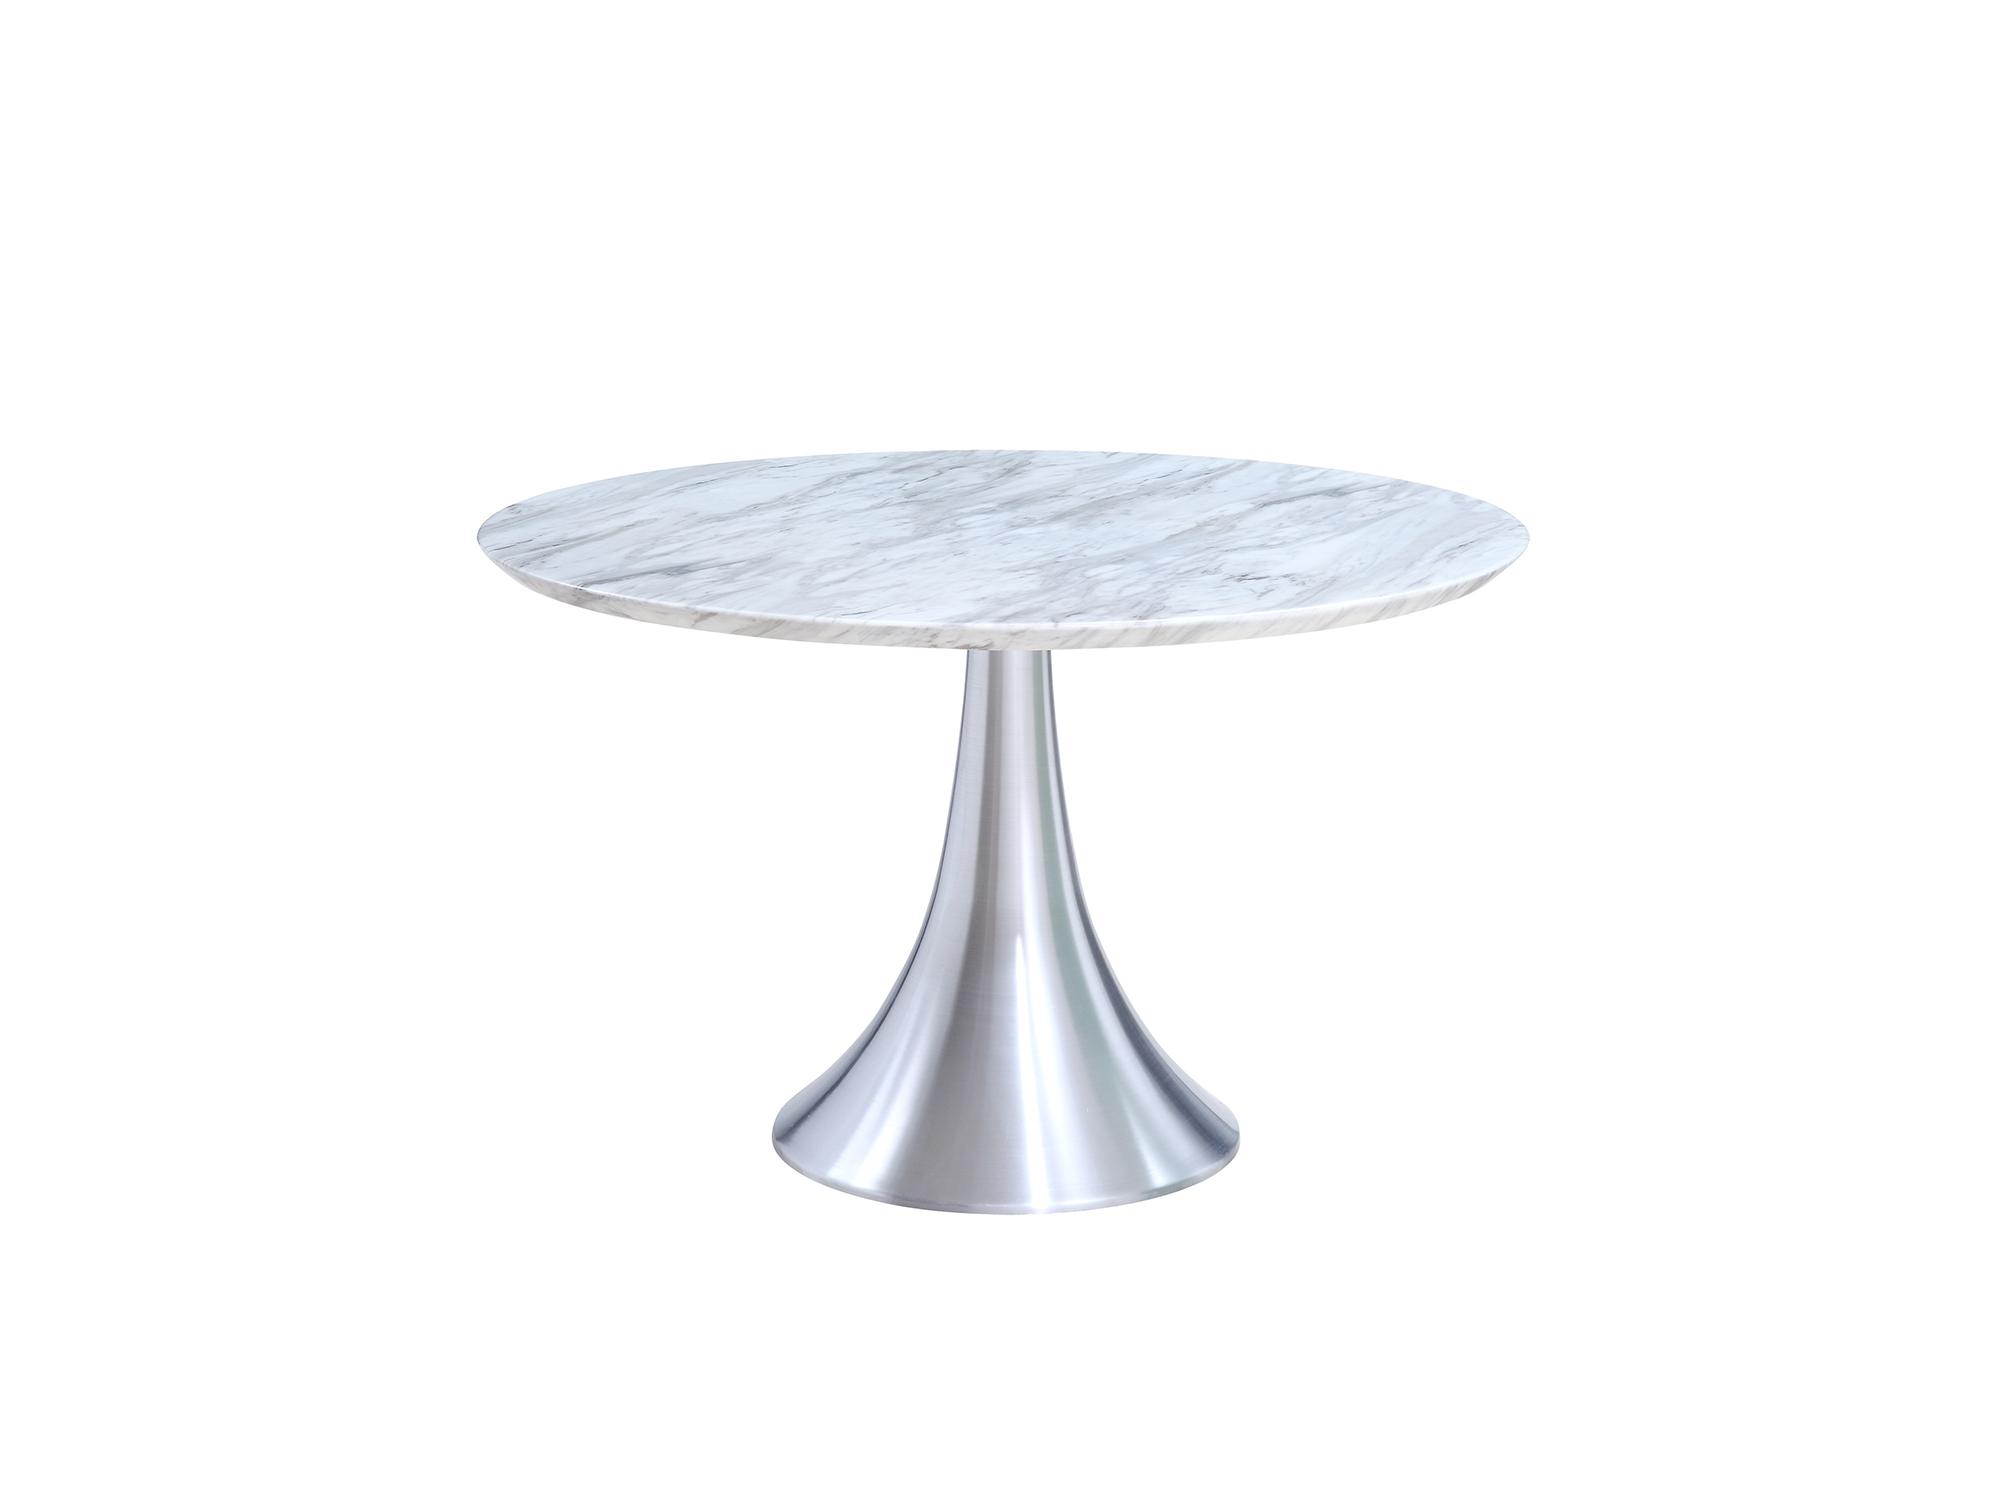 Contemporary Dining Table DT1469-WHT Flow DT1469-WHT in White 